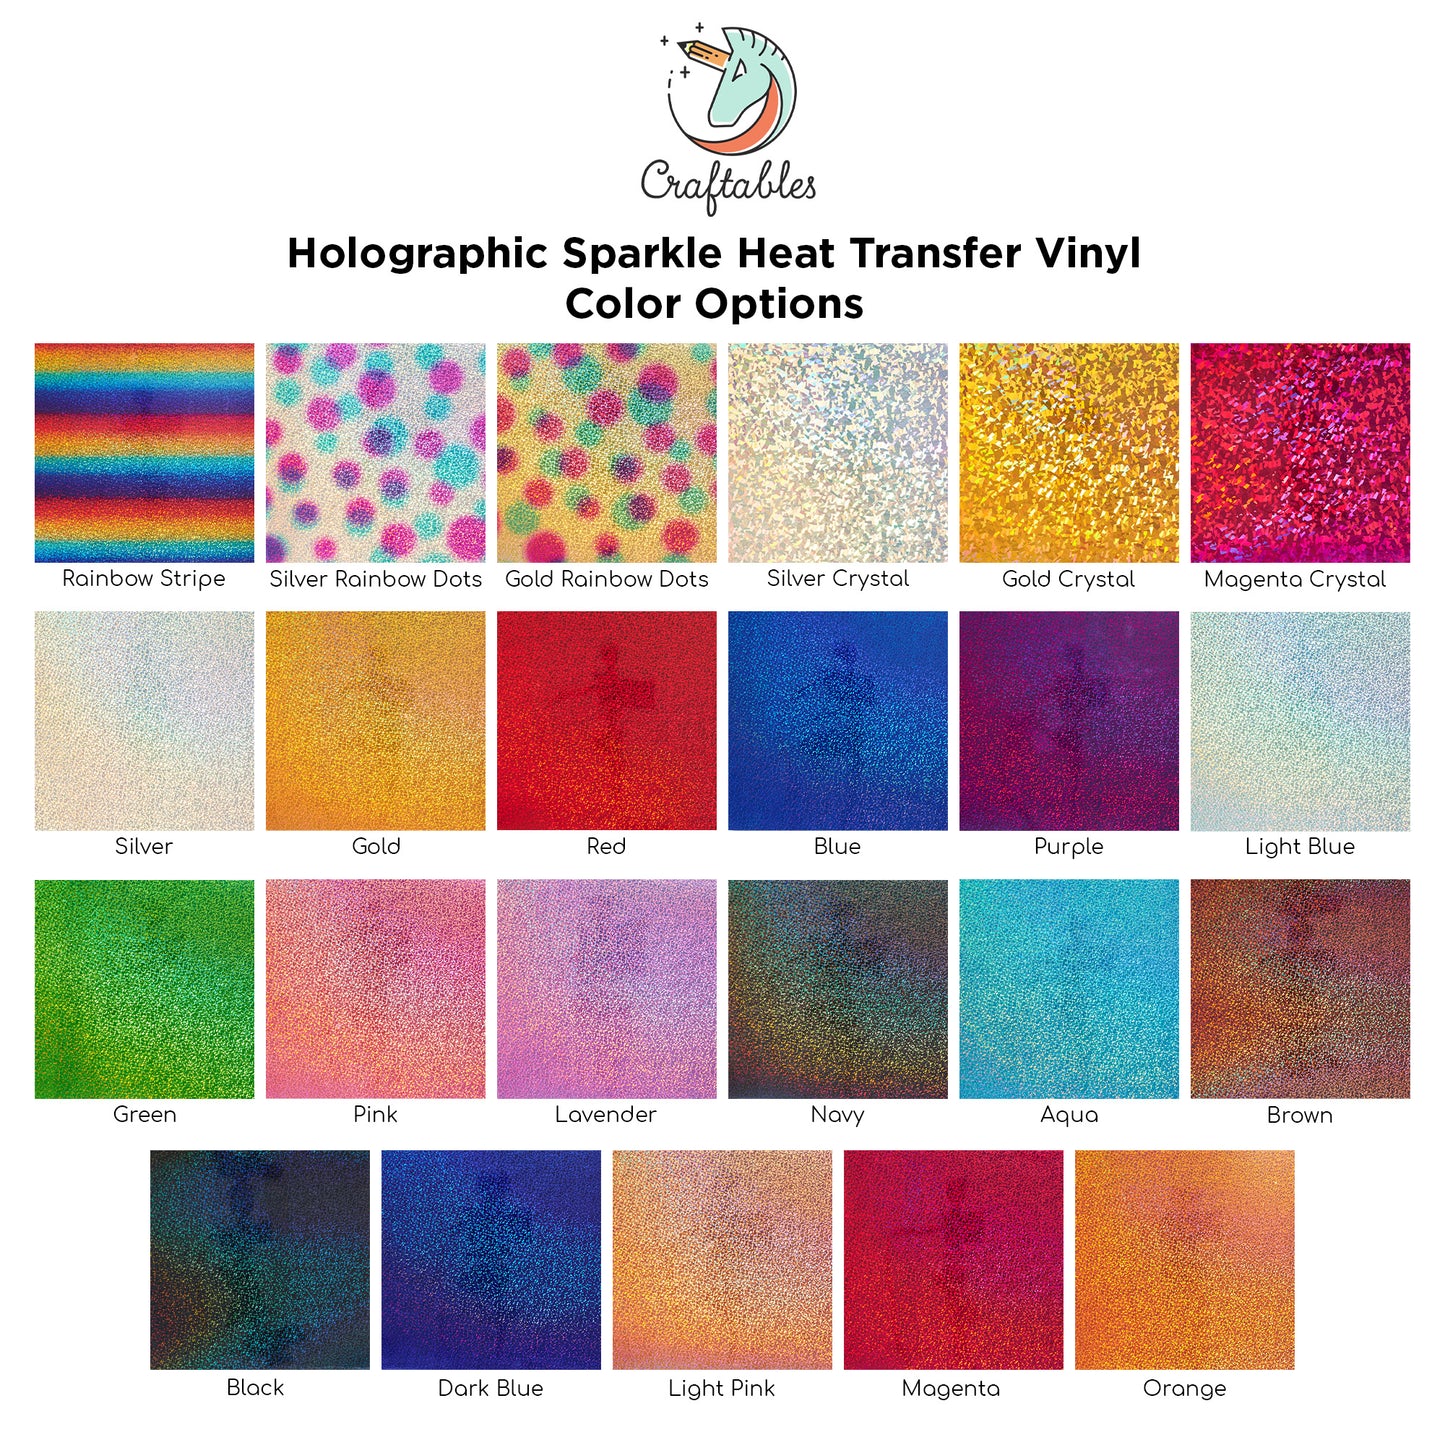 Black Holographic Sparkle Heat Transfer Vinyl Sheets By Craftables